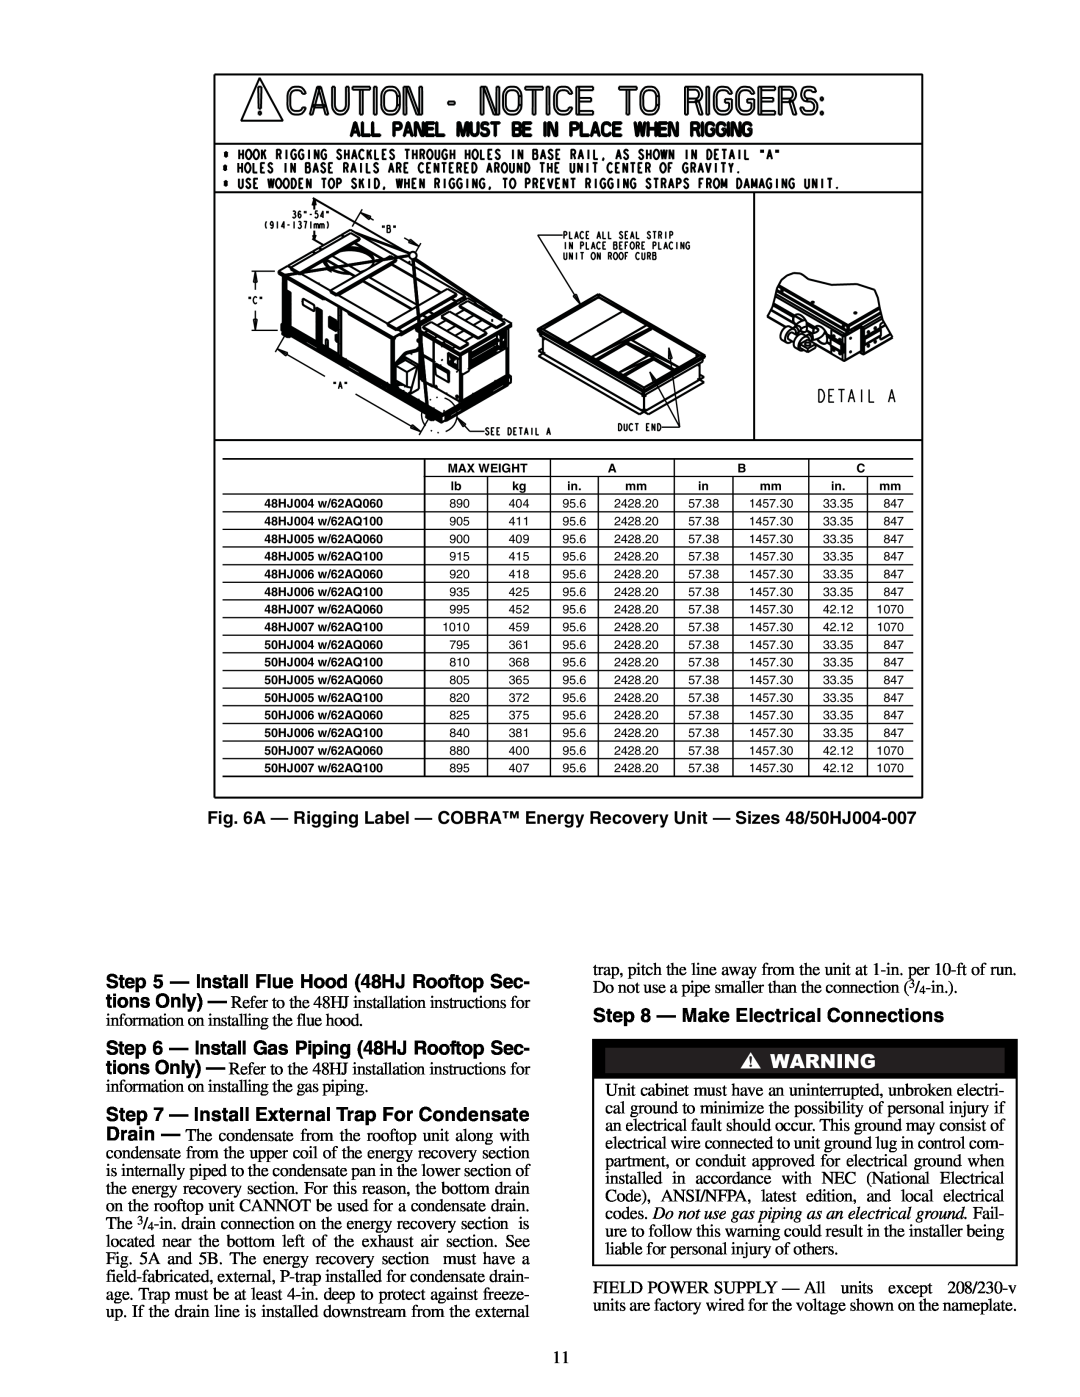 Carrier 48/50HJ004-014 specifications Make Electrical Connections 